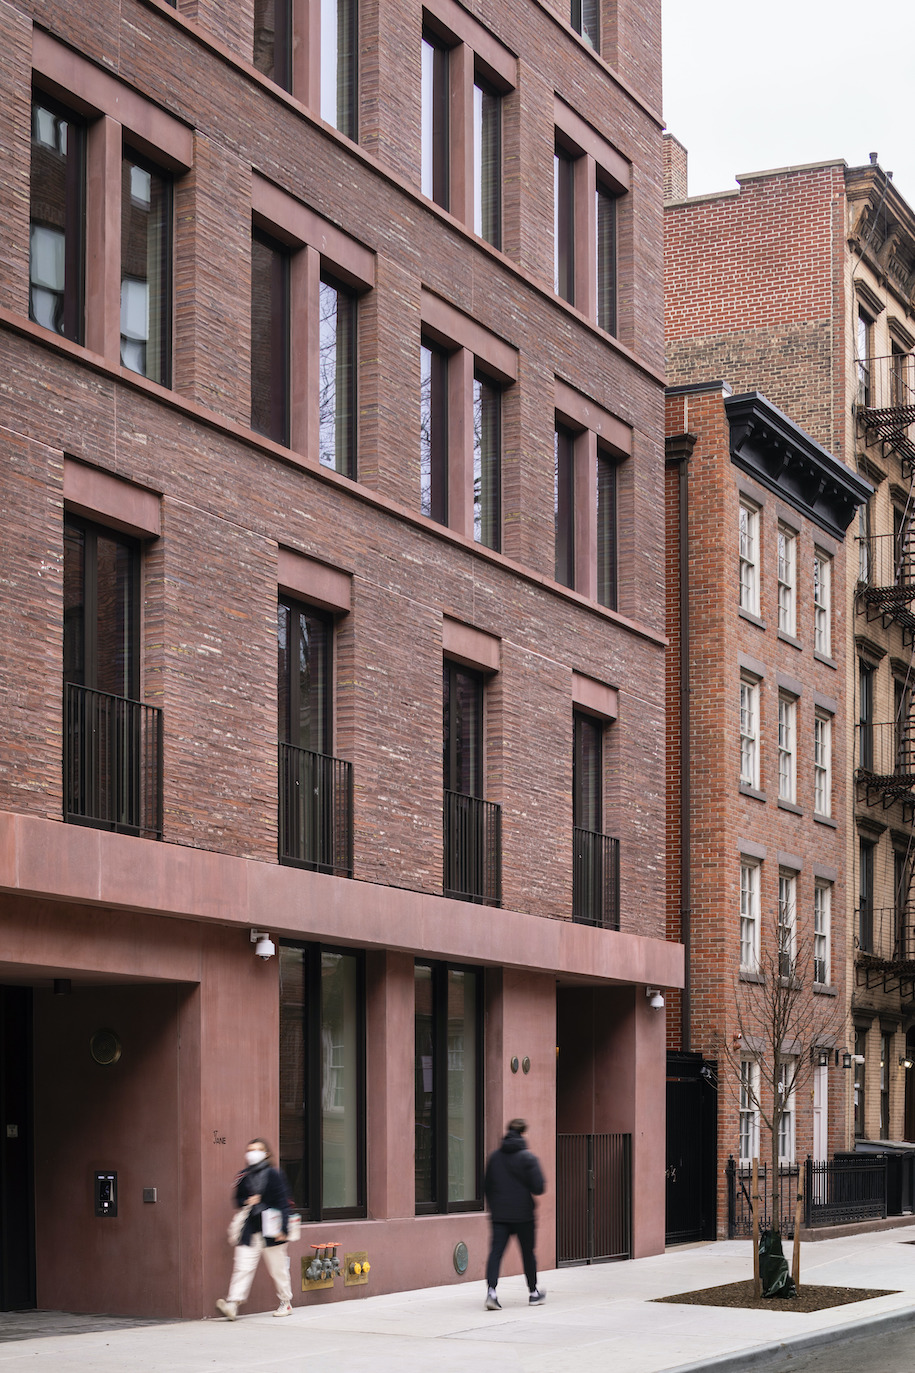 Archisearch 11-19 Jane Street in New York by David Chipperfield Architects draws inspiration from the domestic architecture of Greenwich Village